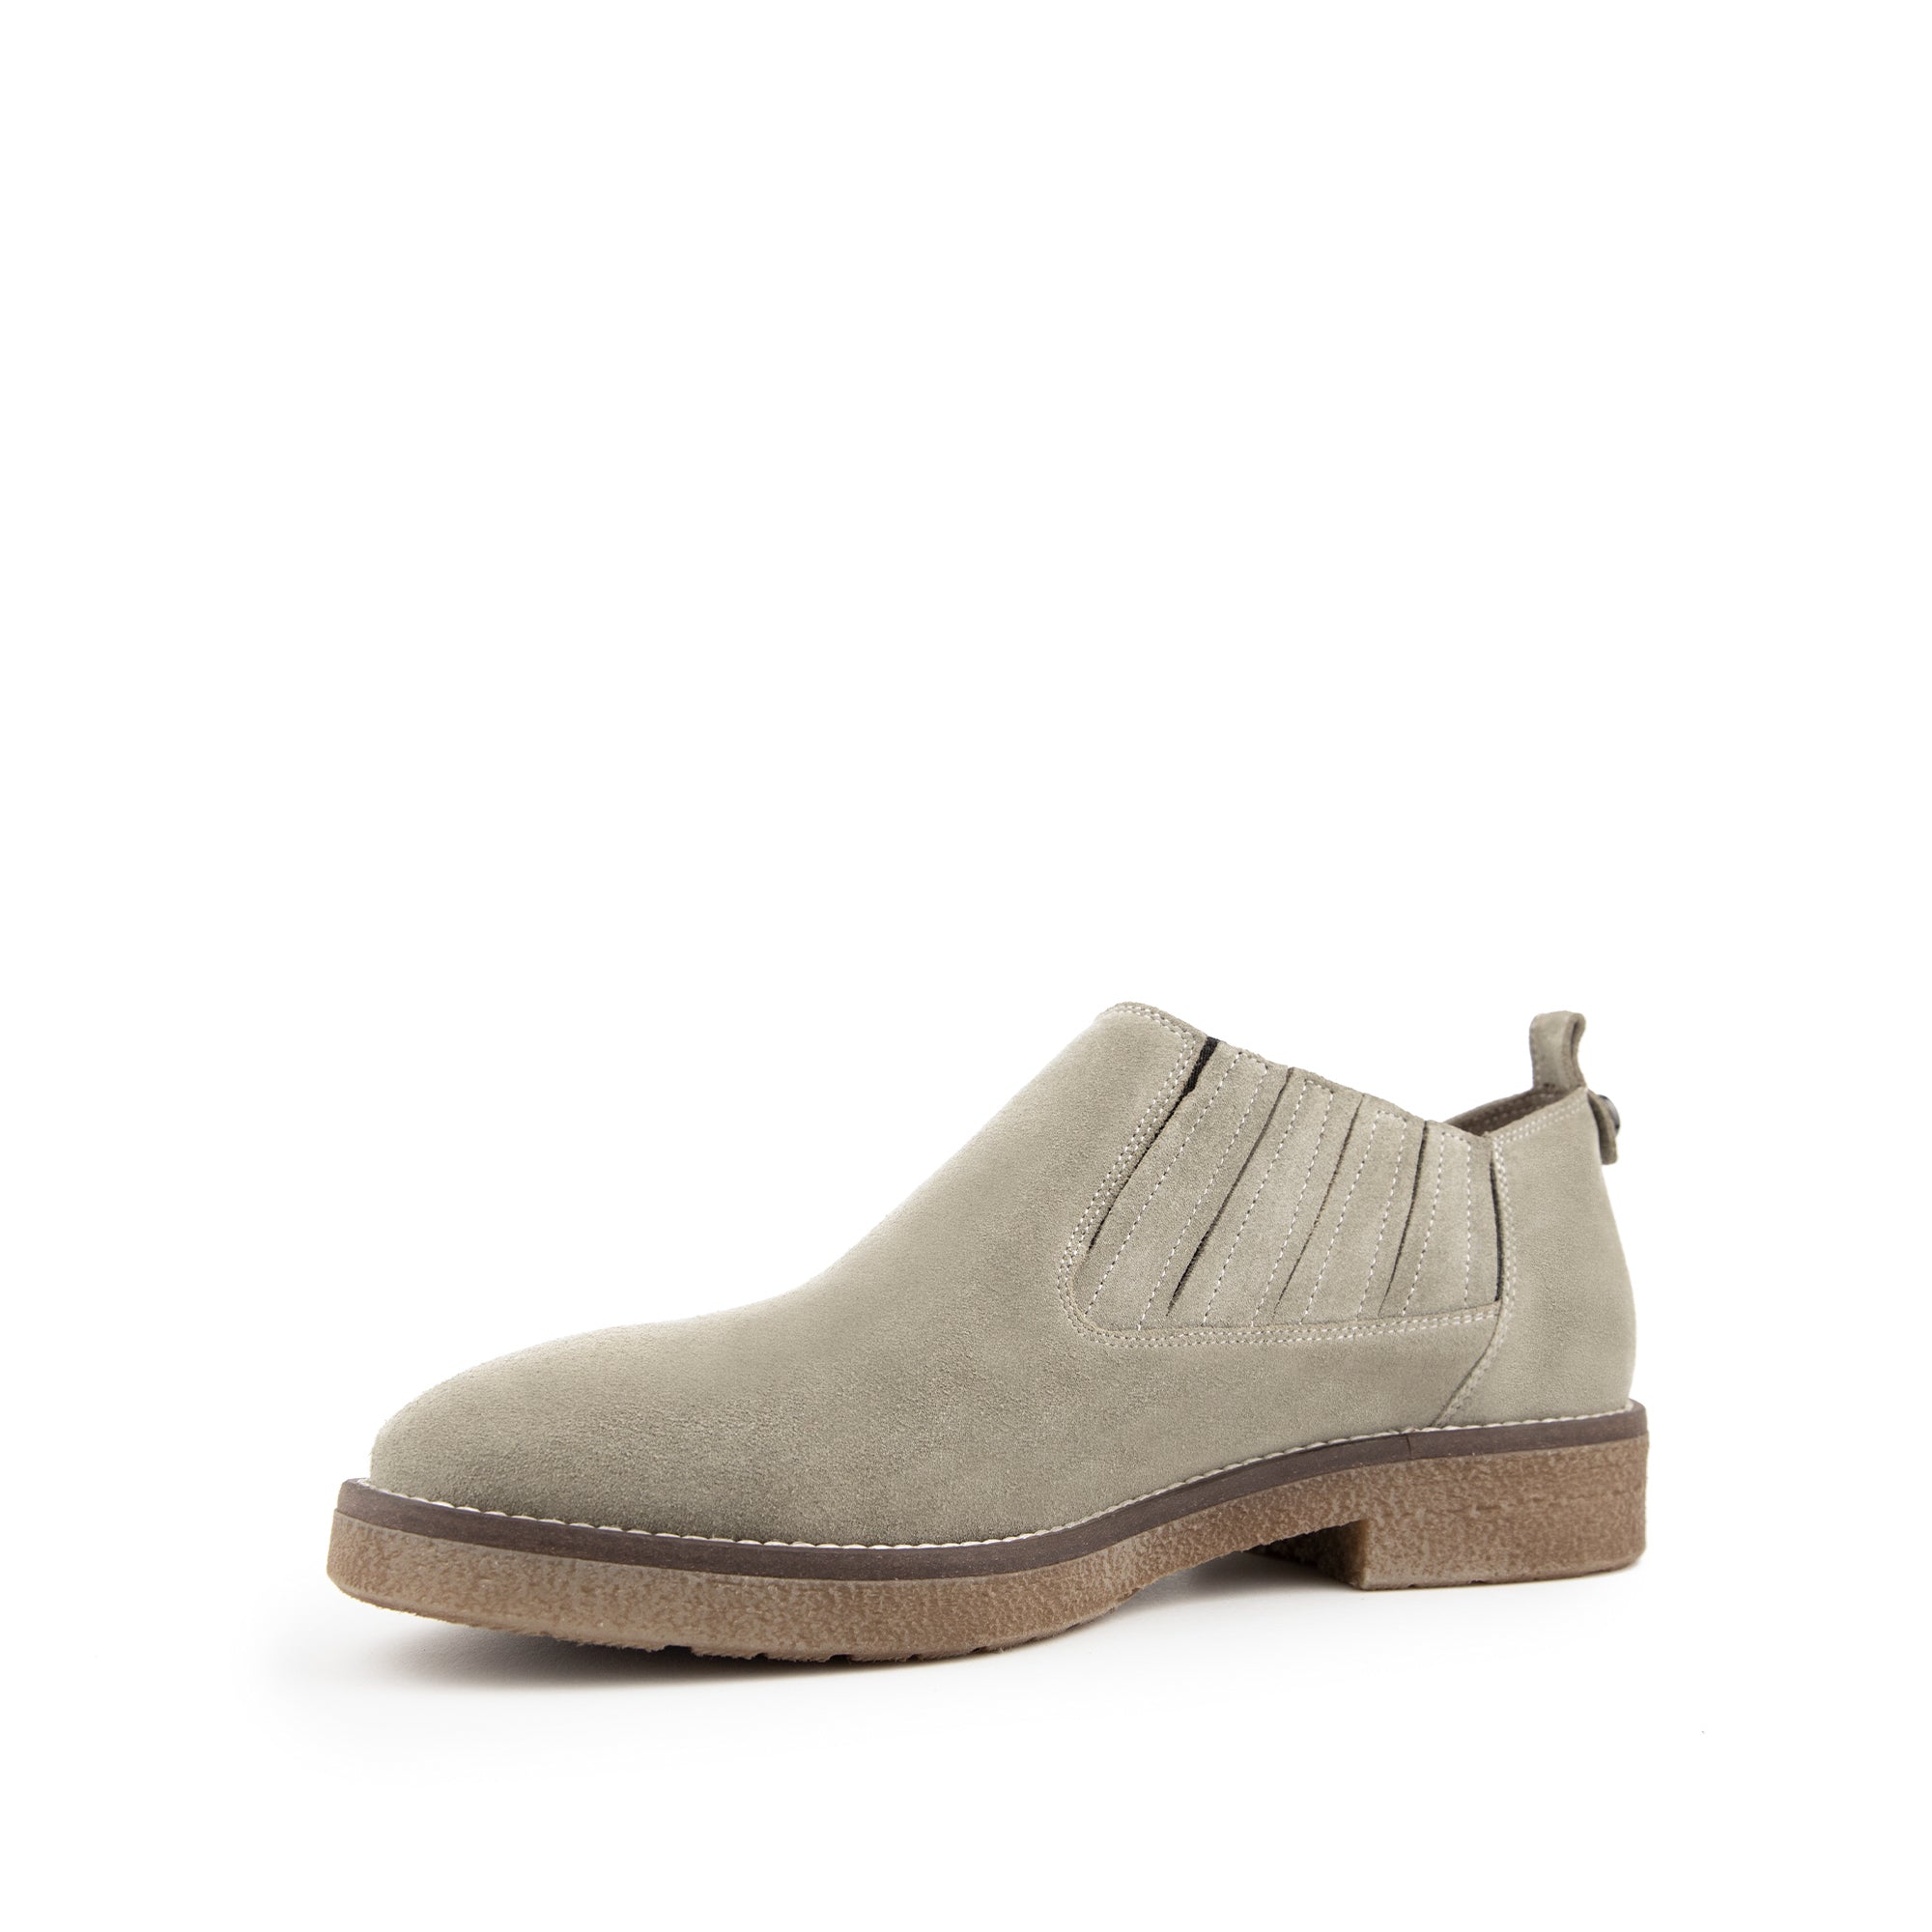 Favola Ankle Boots | Women’s Ankle Boots | Italian Suede Boots ...